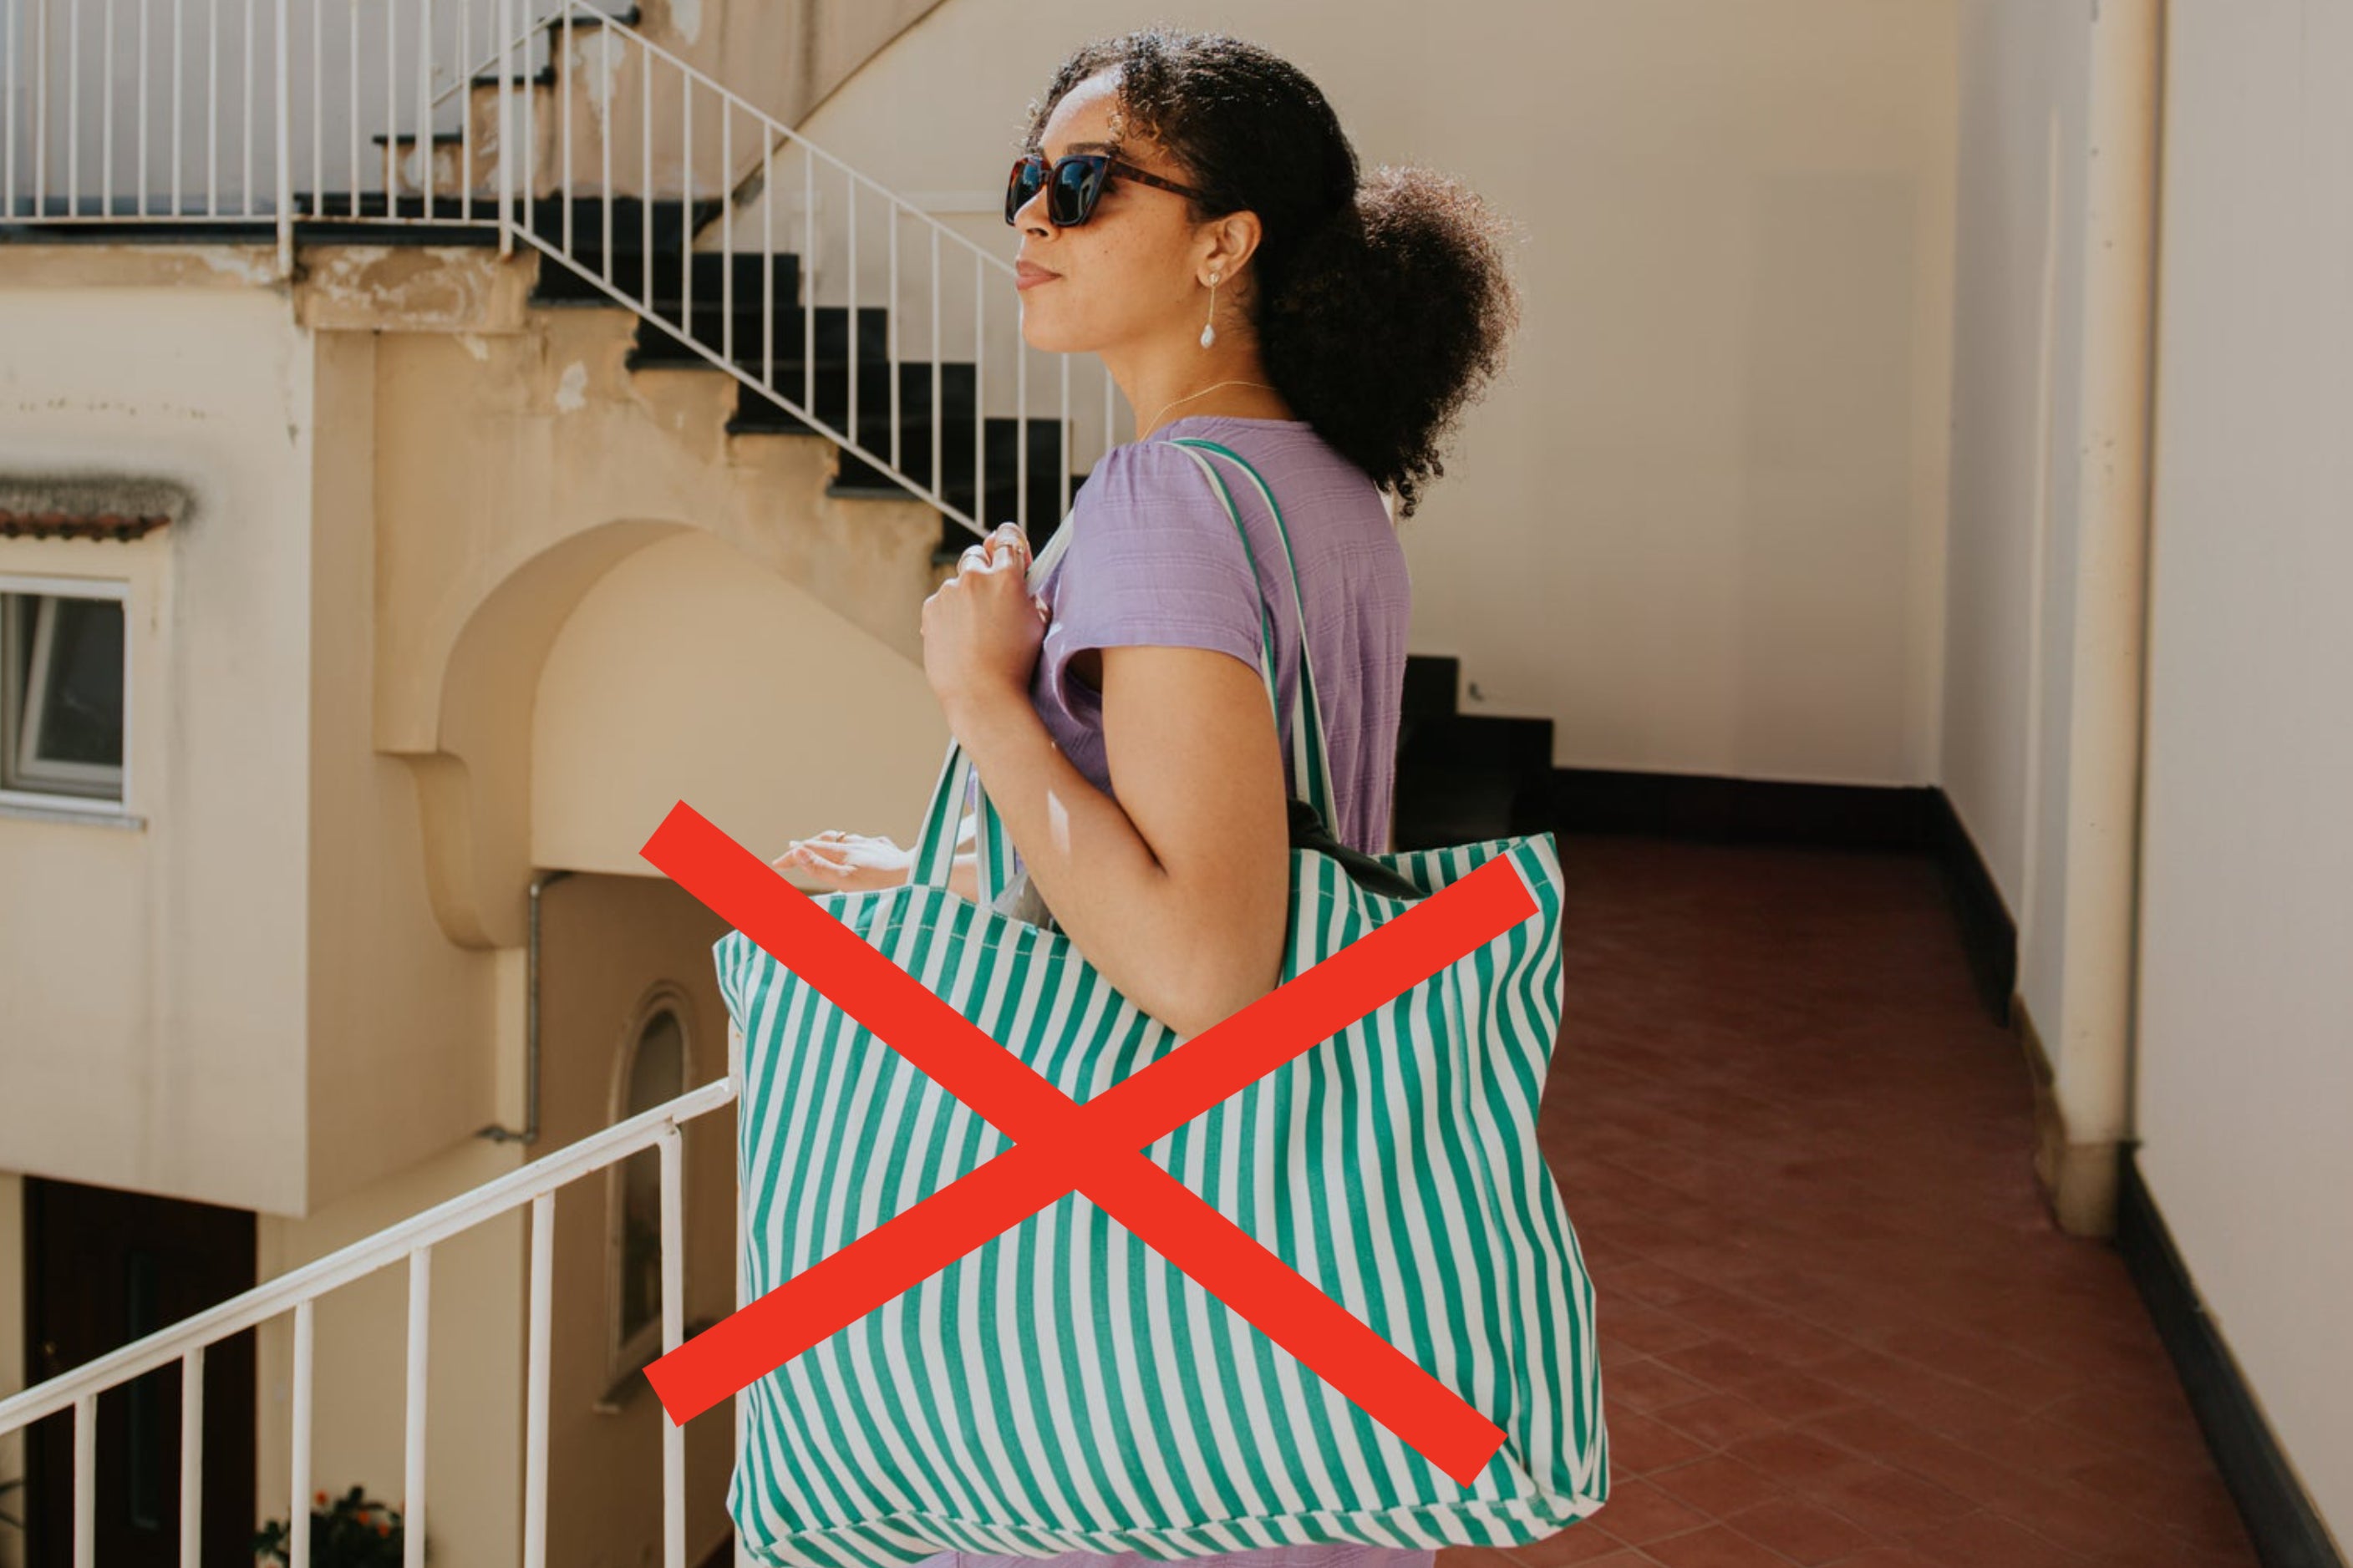 Spine Doctors Say This Is The 1 Type Of Bag They Would Never, Ever Carry